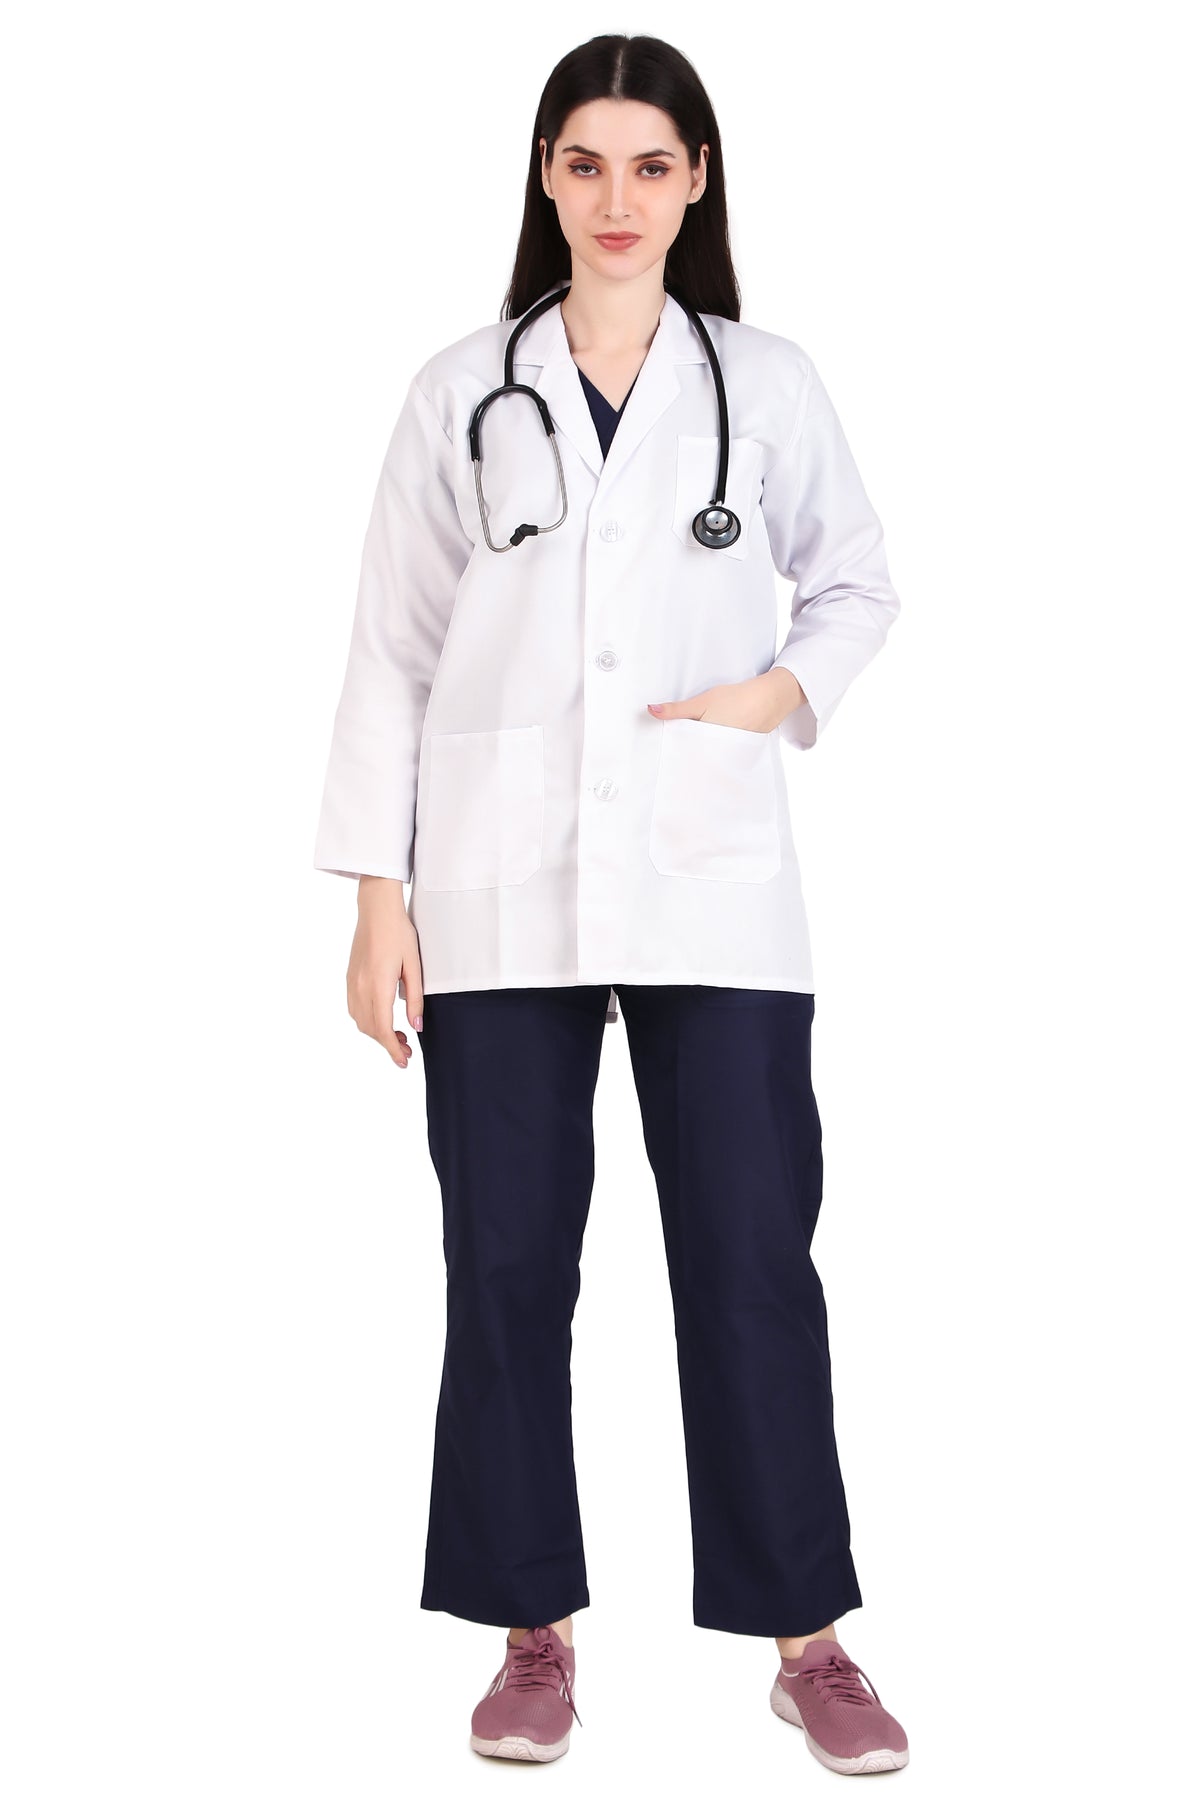 Women’s Full-Sleeves Lab Coat Apron: The Modern Lab Essential